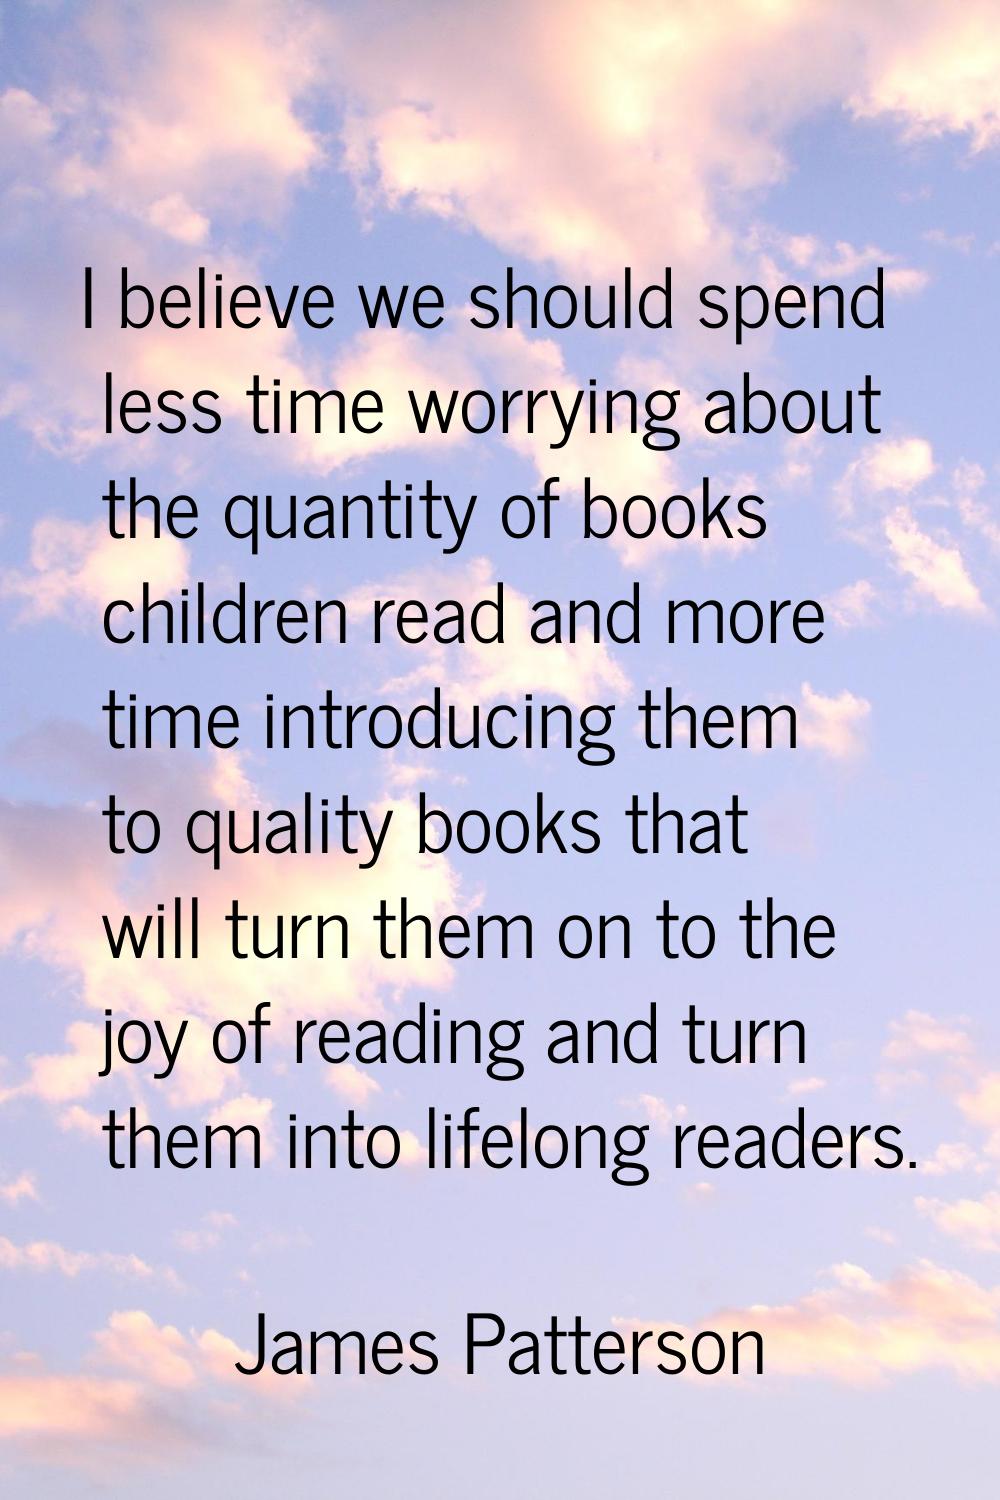 I believe we should spend less time worrying about the quantity of books children read and more tim